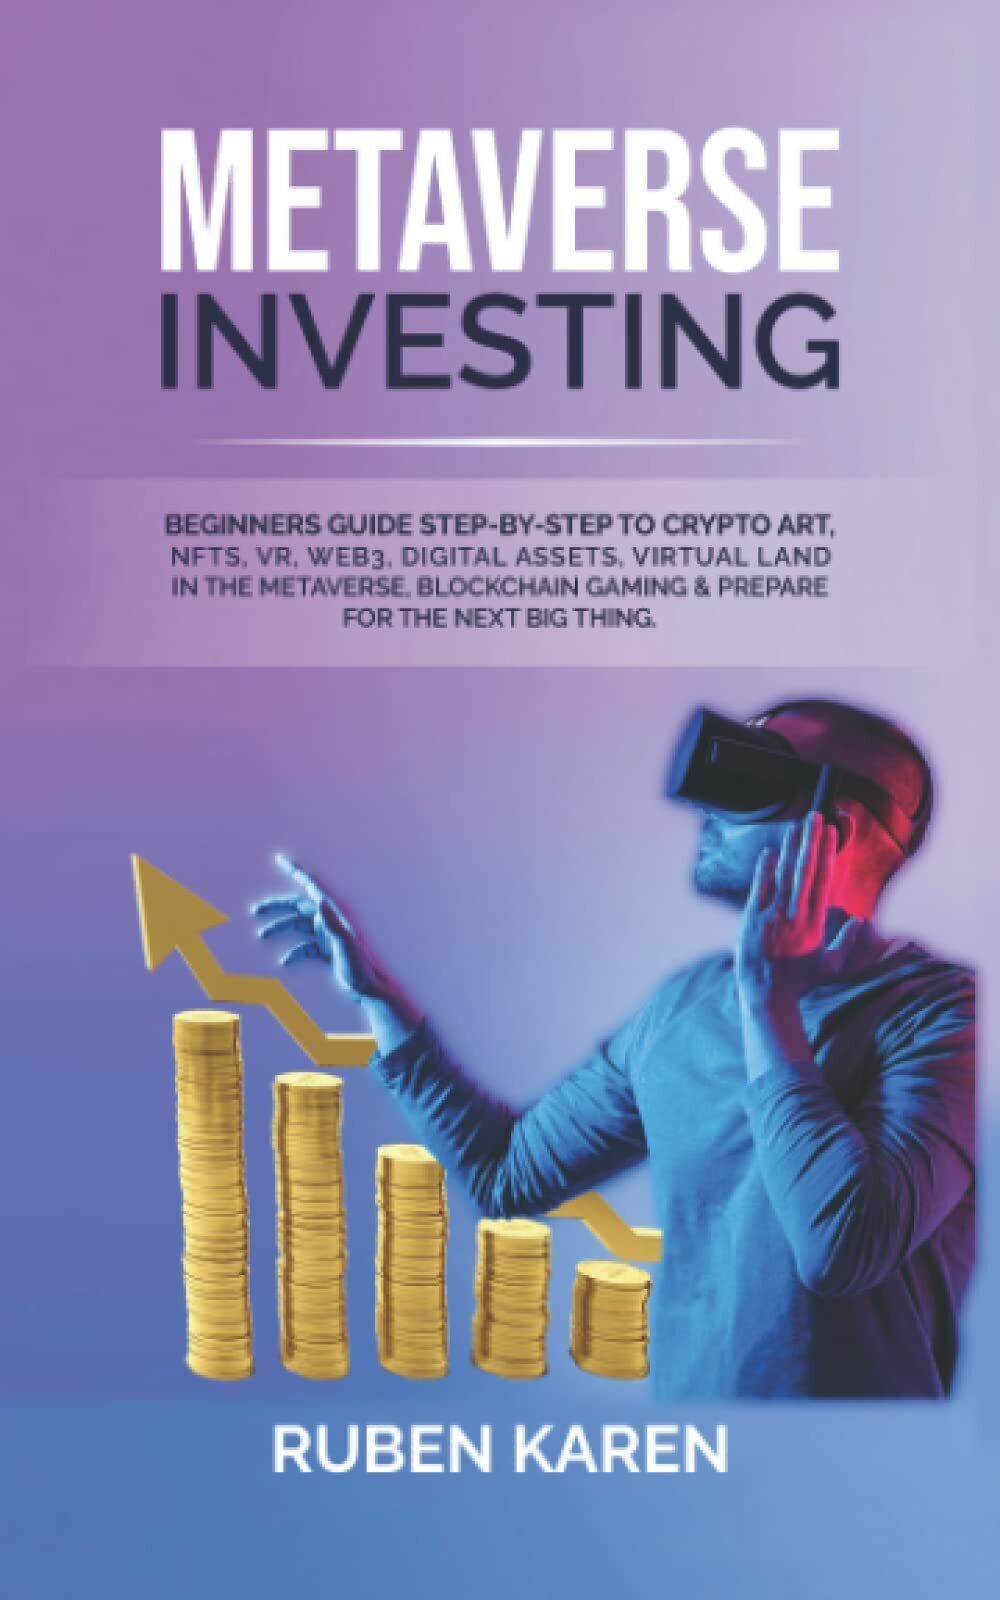 METAVERSE INVESTING: Beginners Guide Step-by-Step to Crypto Art, NFTs, VR, Web3,